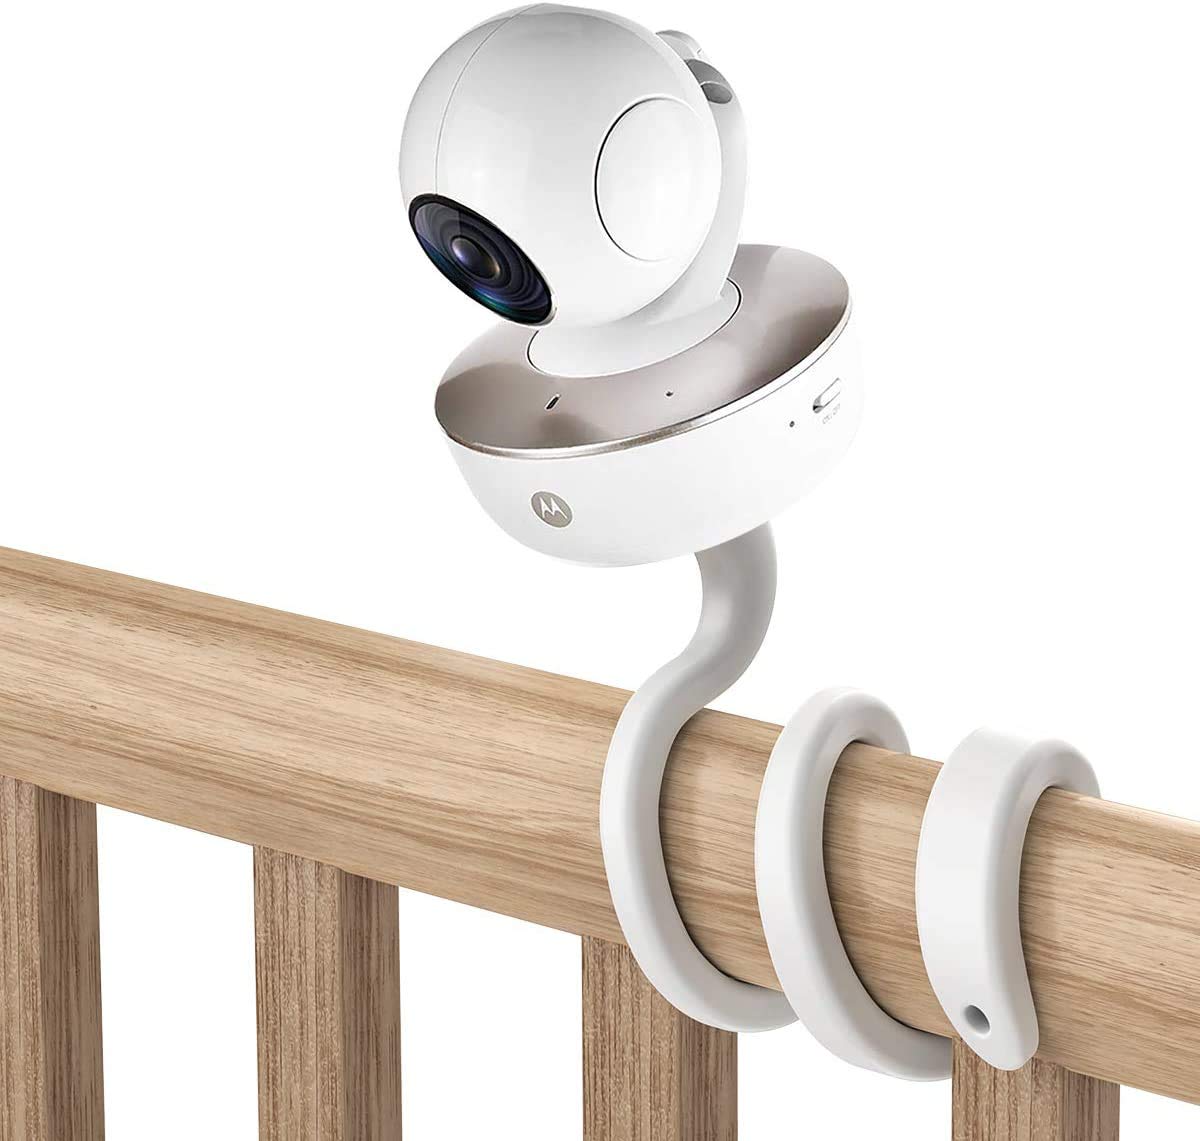 HOLACA Universal Baby Monitor Mount for Arlo/Motorola Baby Monitor/Nannio Monitor/HelloBaby - Versatile for Any Other Cameras with 1/4 Screw Twist Holder Without Tools or Wall Damage(white)